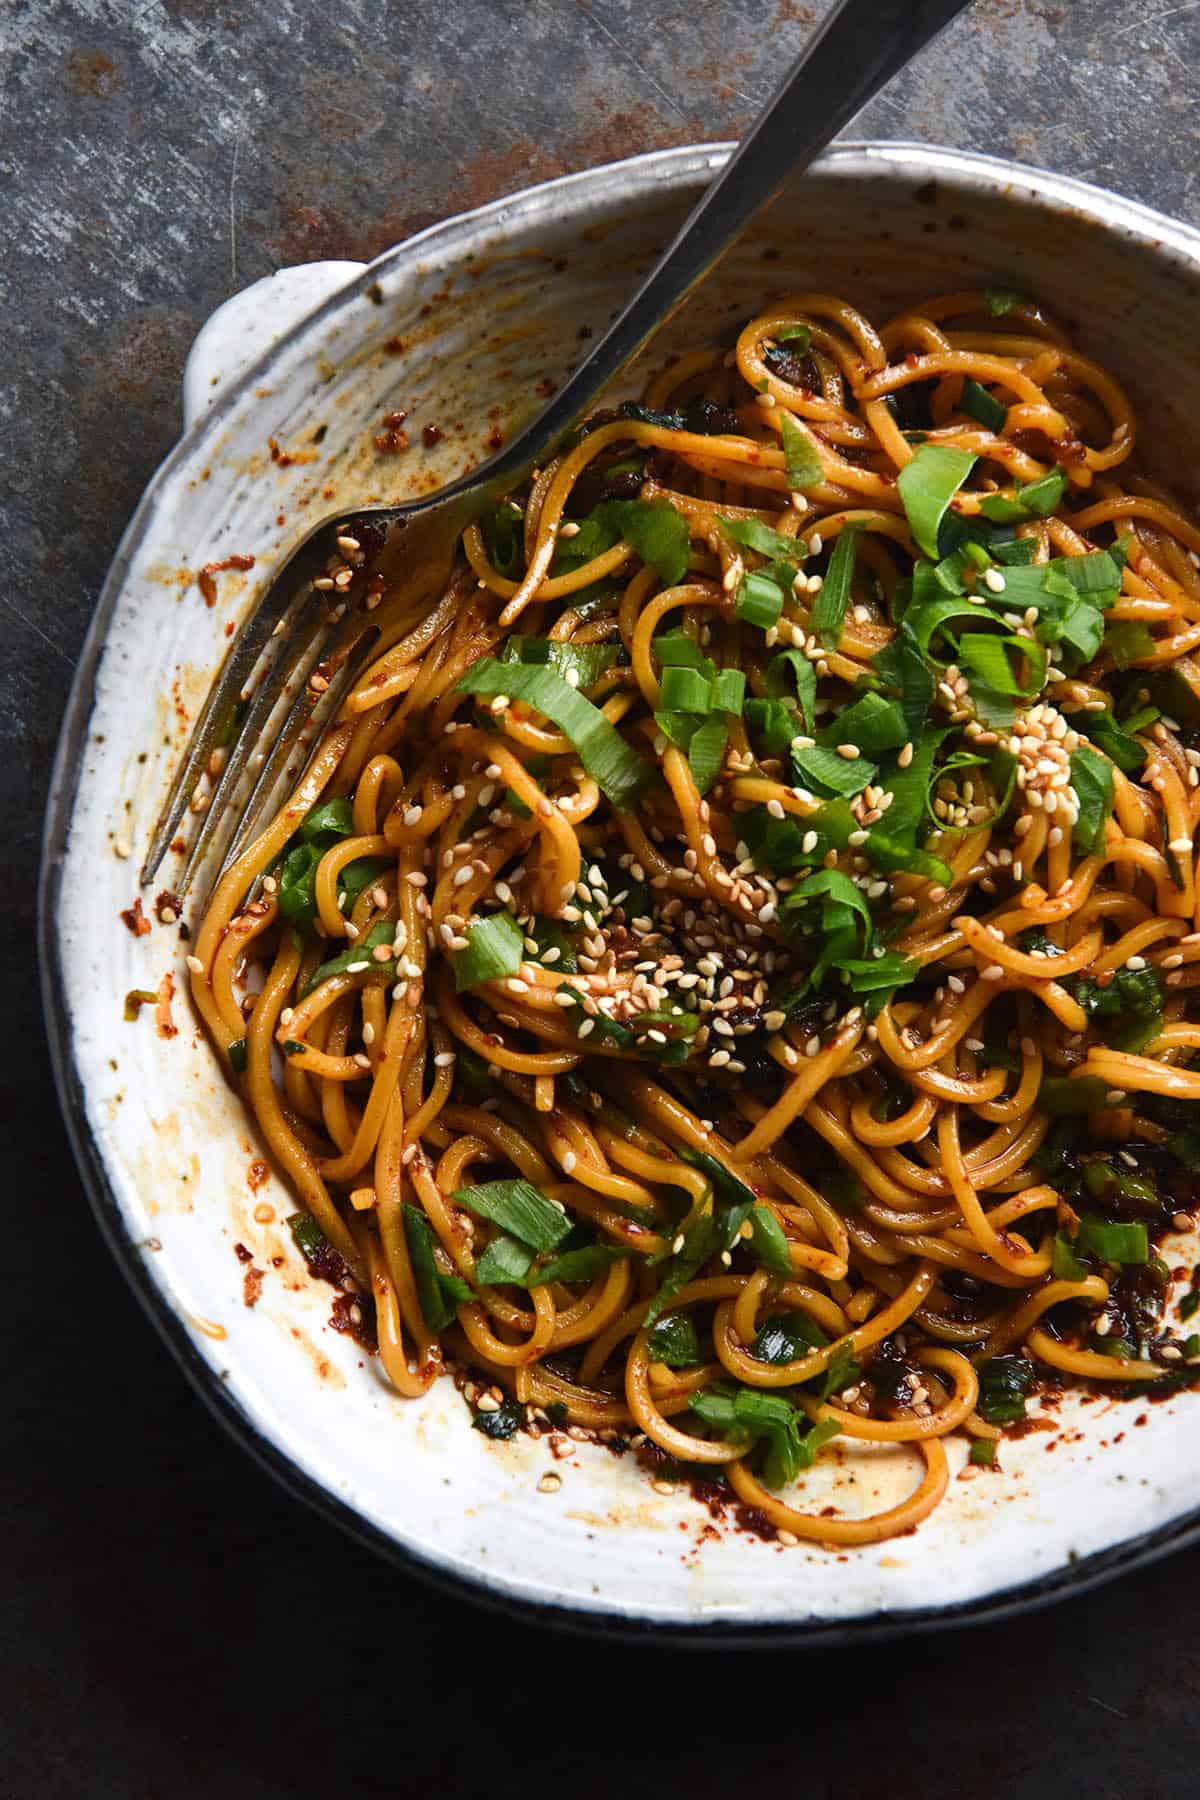 A close up aerial view of FODMAP friendly chilli oil noodles in a white ceramic bowl. A fork pokes out of the top left hand side of the bowl, extending across to the right. The bowl sits atop a dark blue metal backdrop. The noodles are casually strewn in the bowl and topped with sesame seeds and spring onion greens